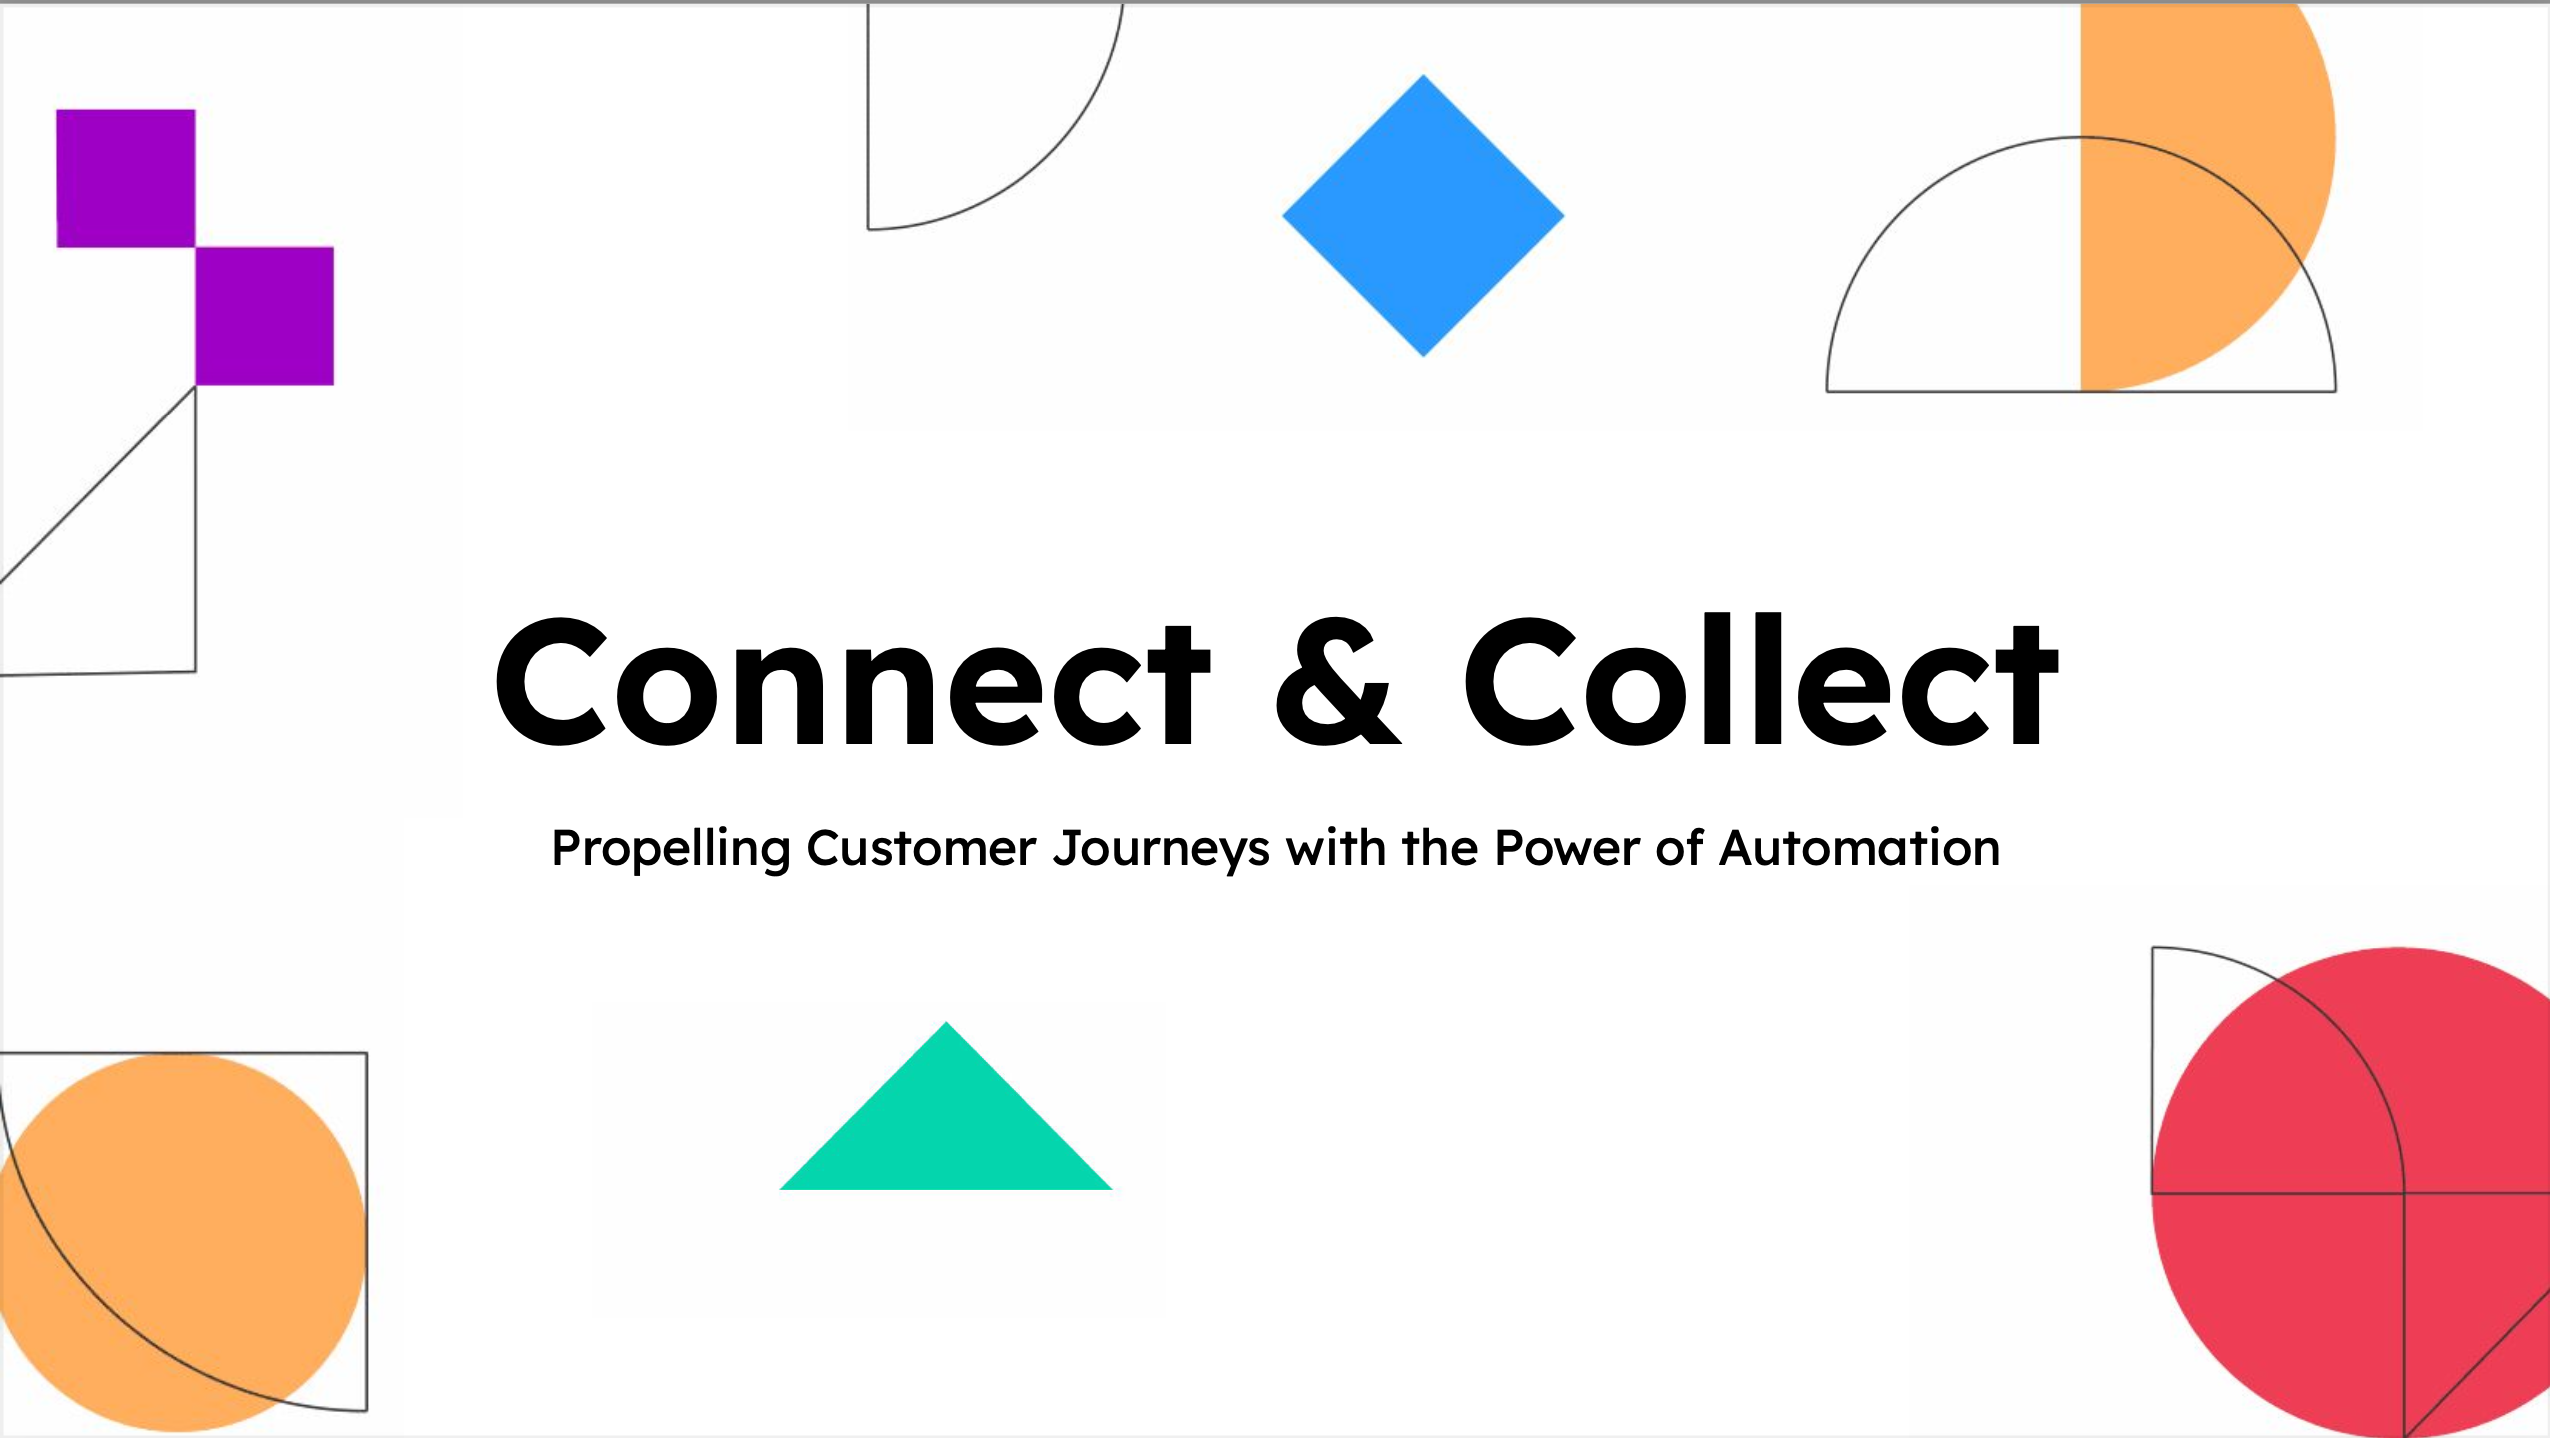 Connect and Collect: Propelling Customer Journeys with the Power of Automation